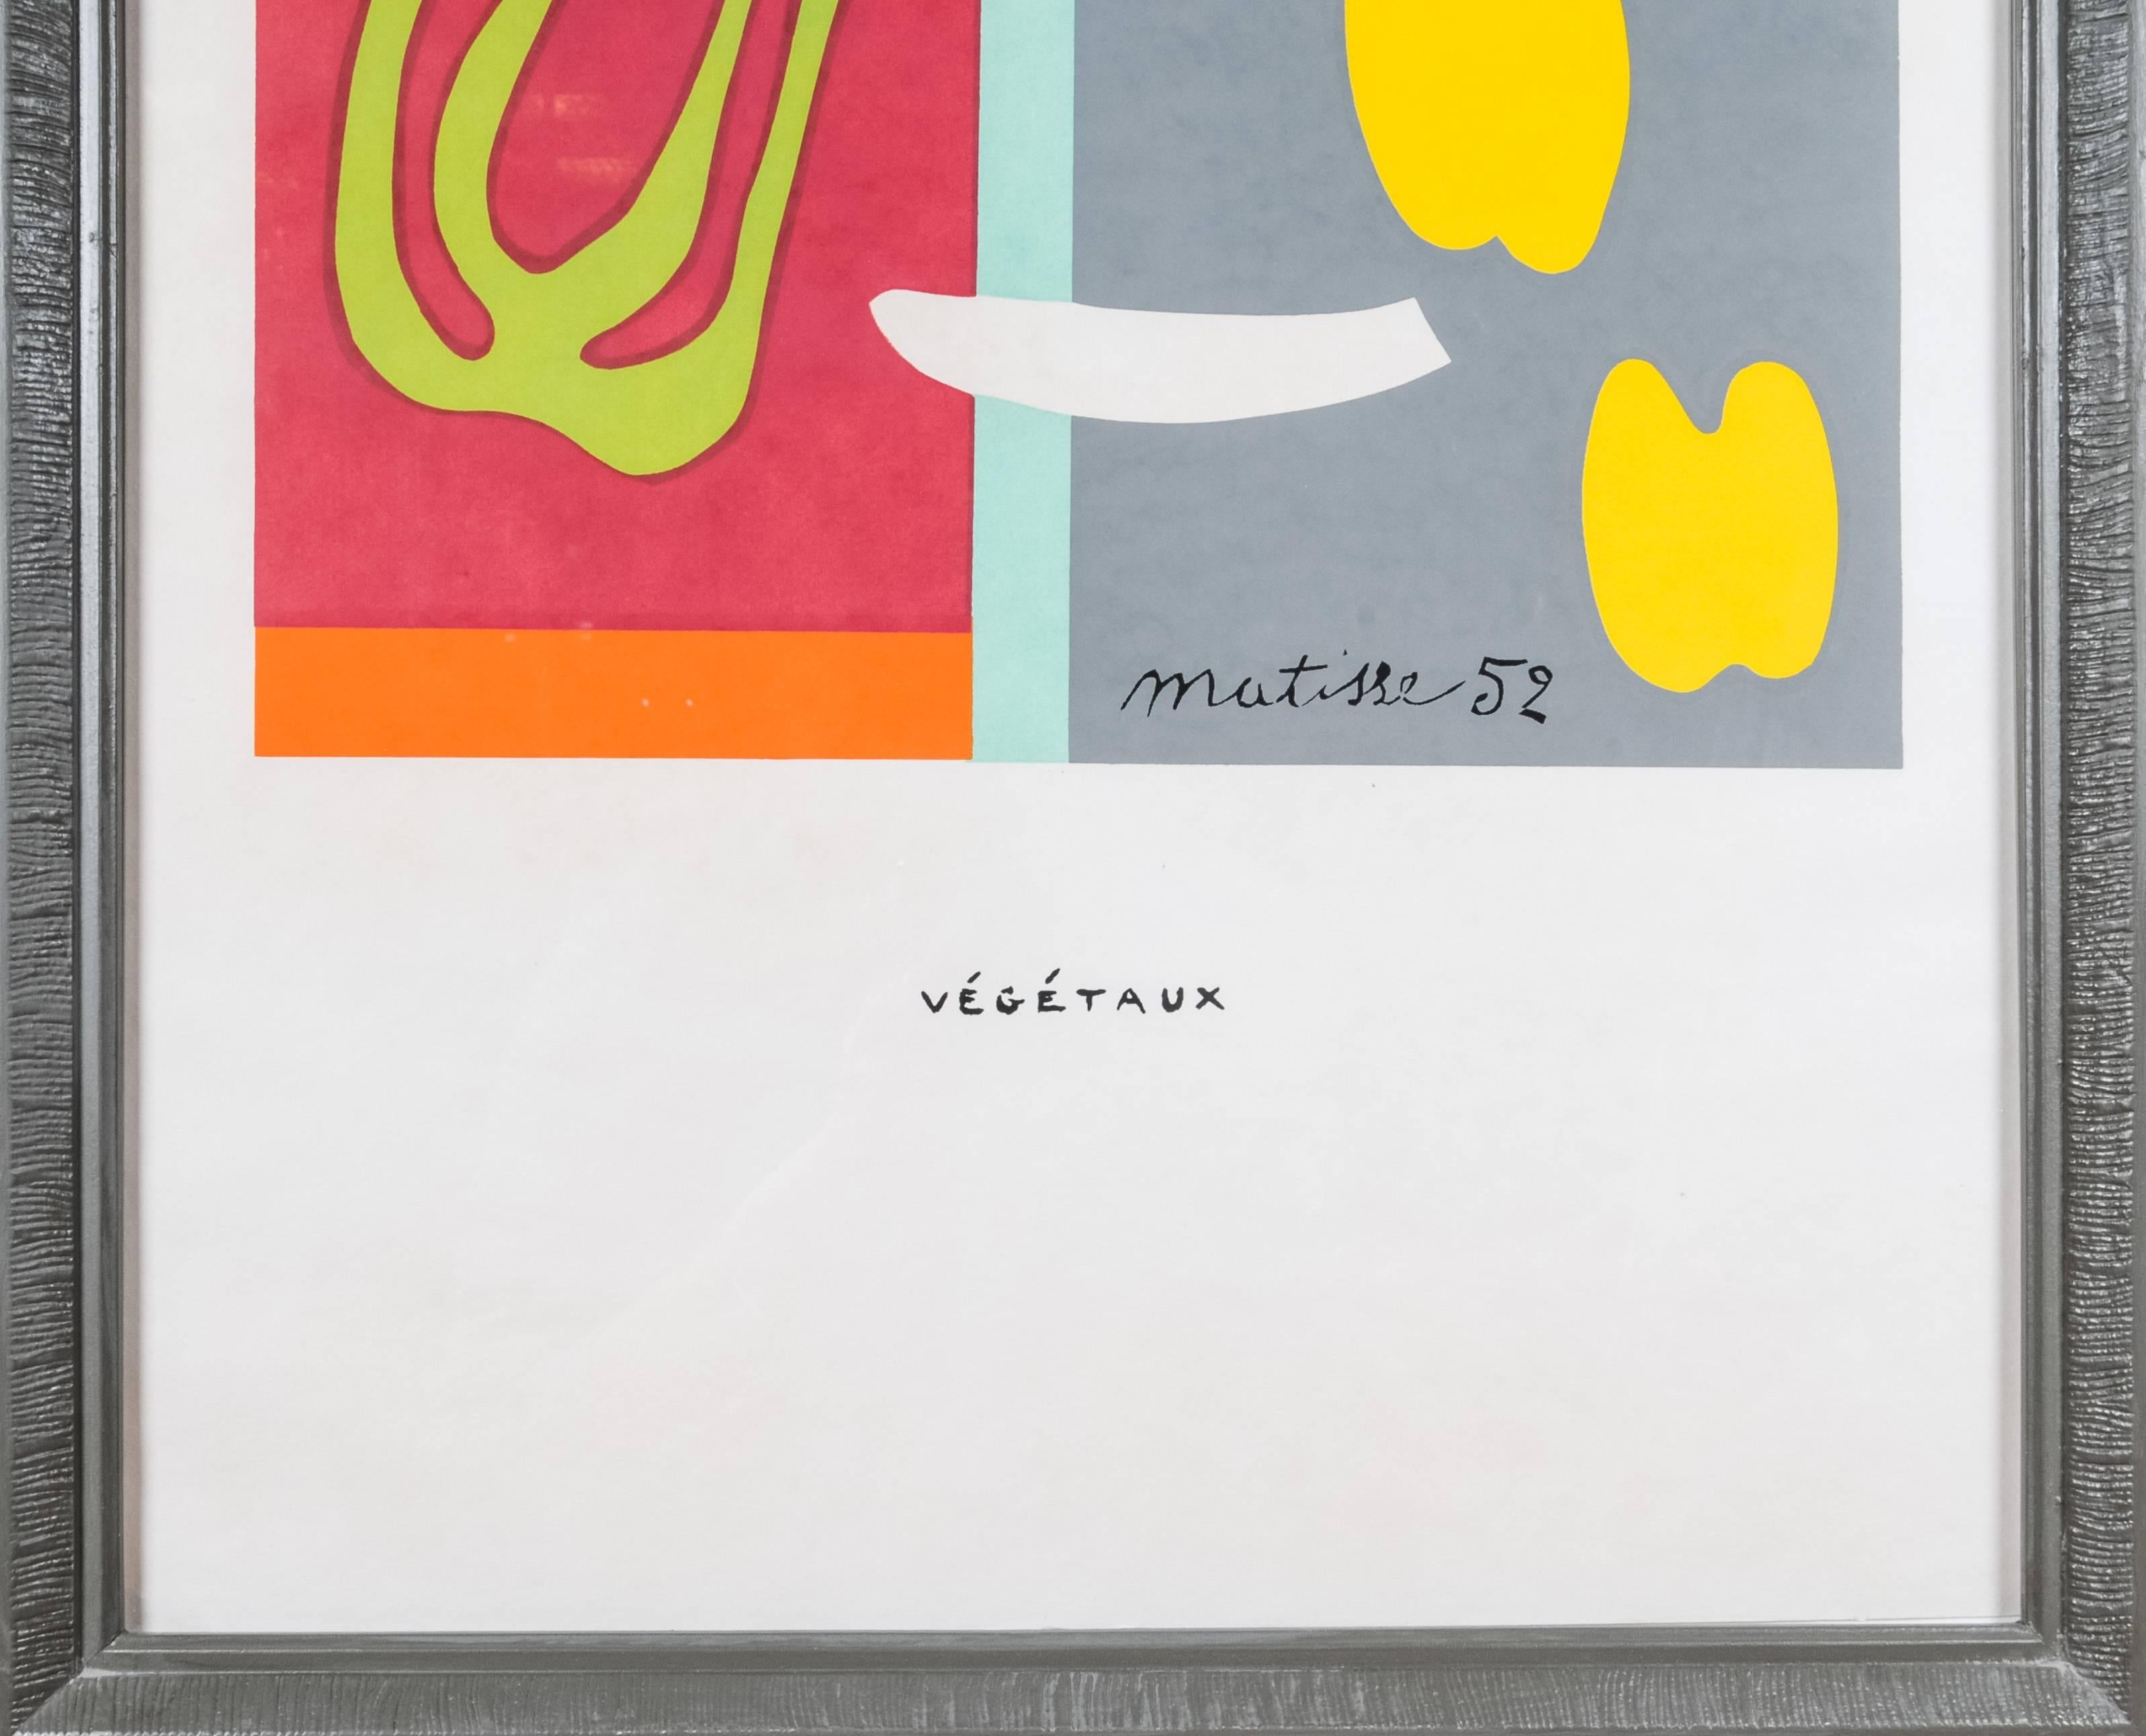 Original serigraphs from the 1952 edition after Matisse's cut-outs. There are housed in the original frame and has conservation backing.

The piece has been cleaned by J.E. Thompson Art Conservation, LLC.
 

Artist: Henri Matisse (French,